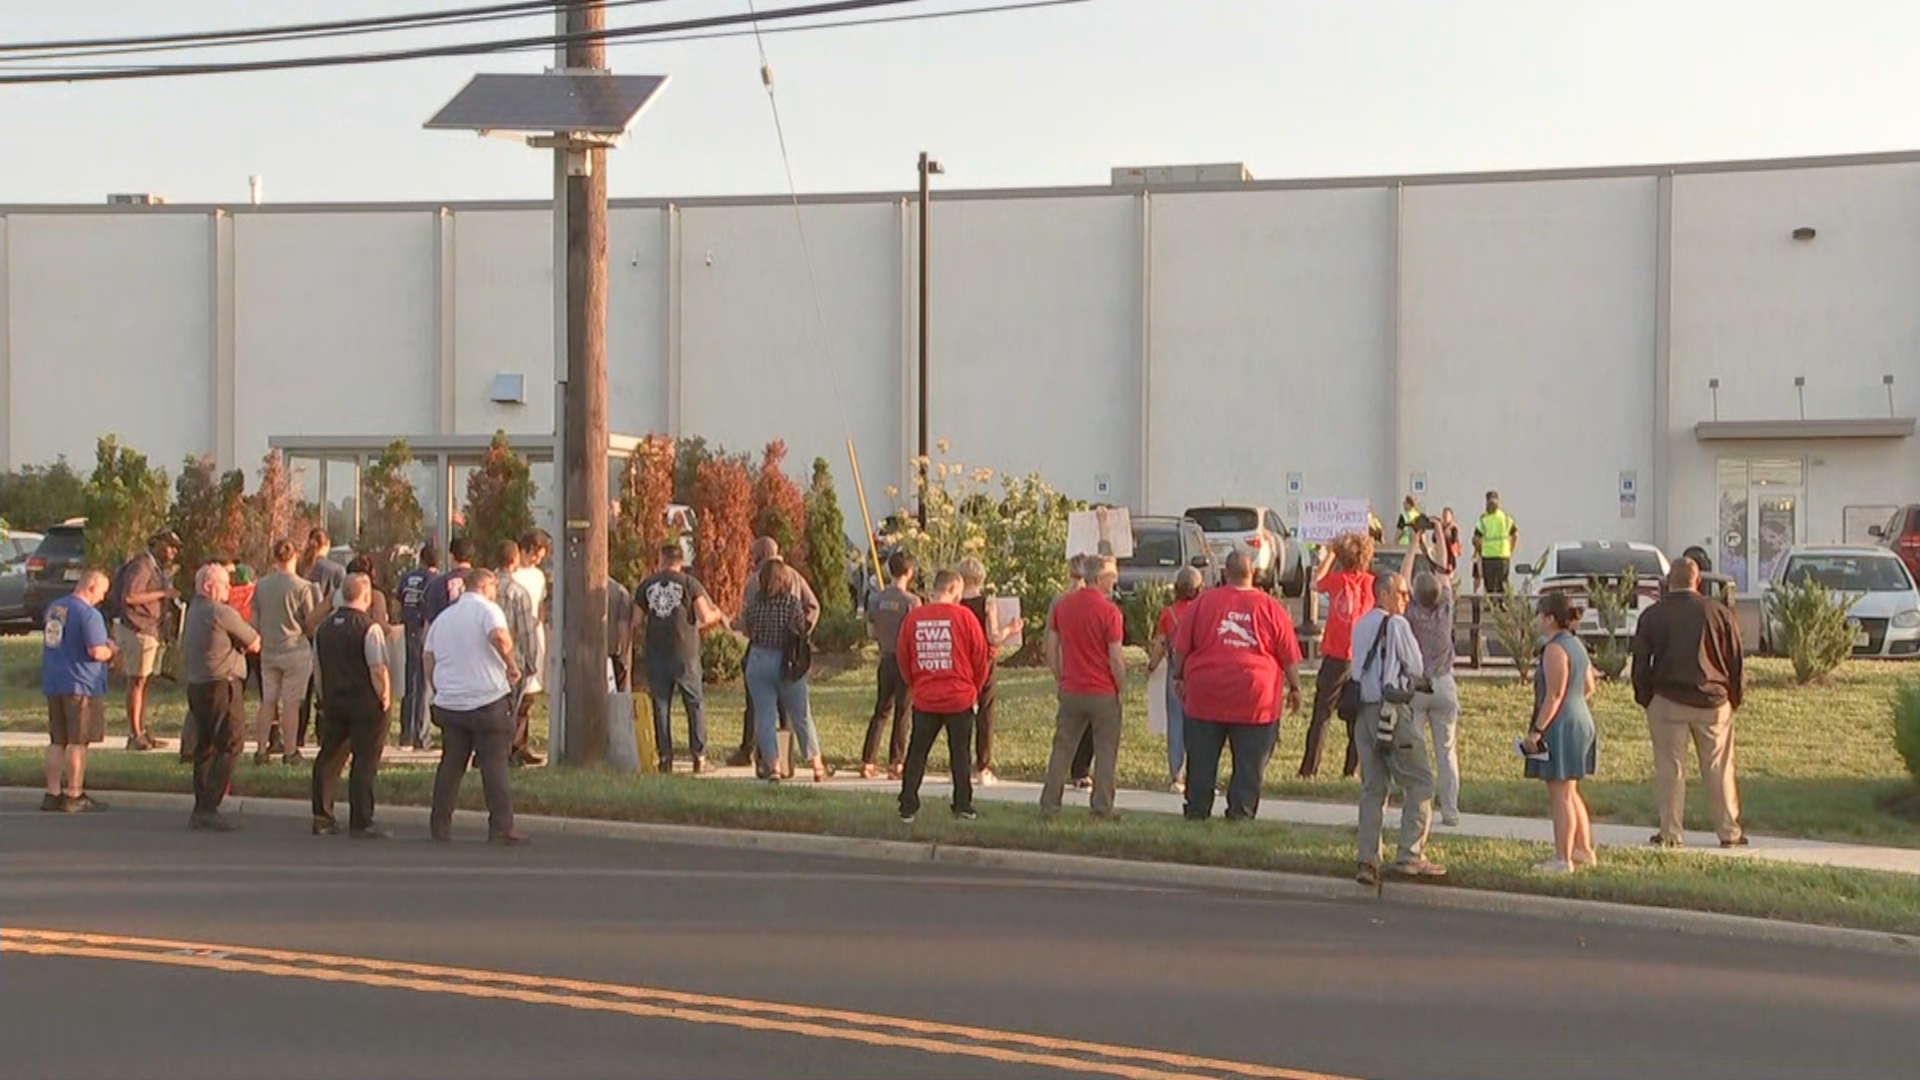 Amazon Workers Walk Out On Job At Facility In Bellmawr, Camden County